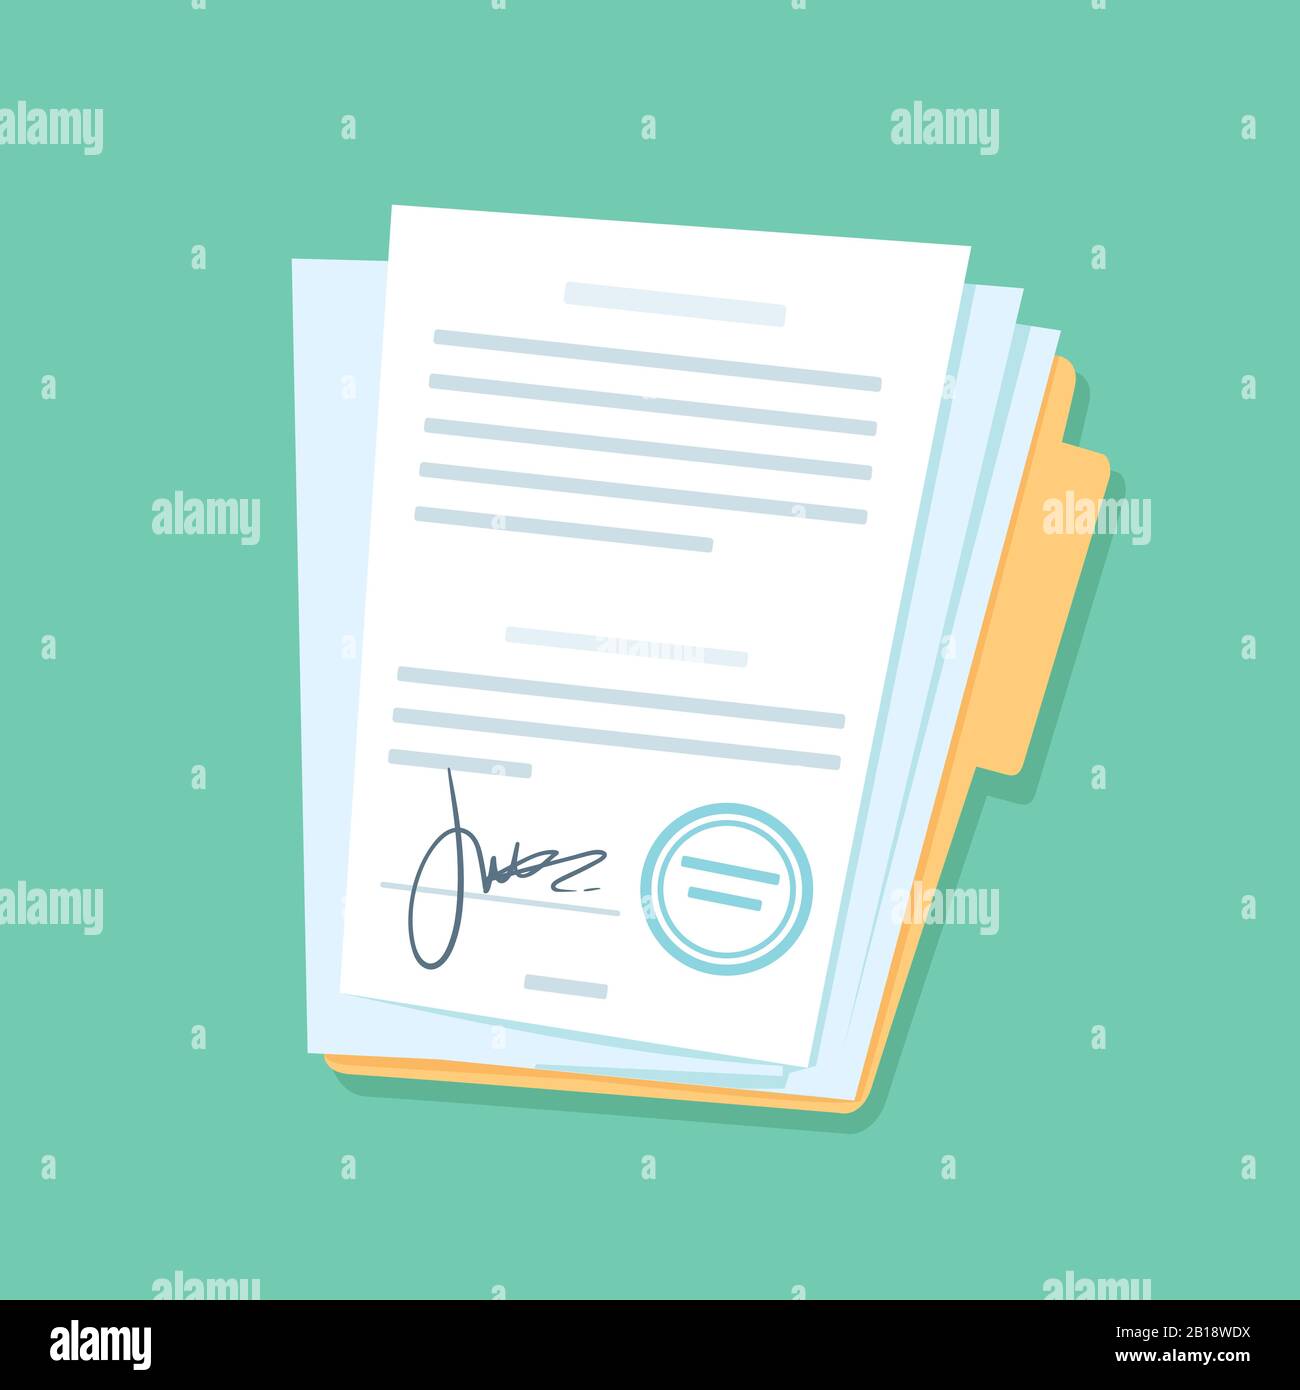 Signed paper documents. Manual signature on important office papers, stamped documentation files in files folder vector illustration Stock Vector